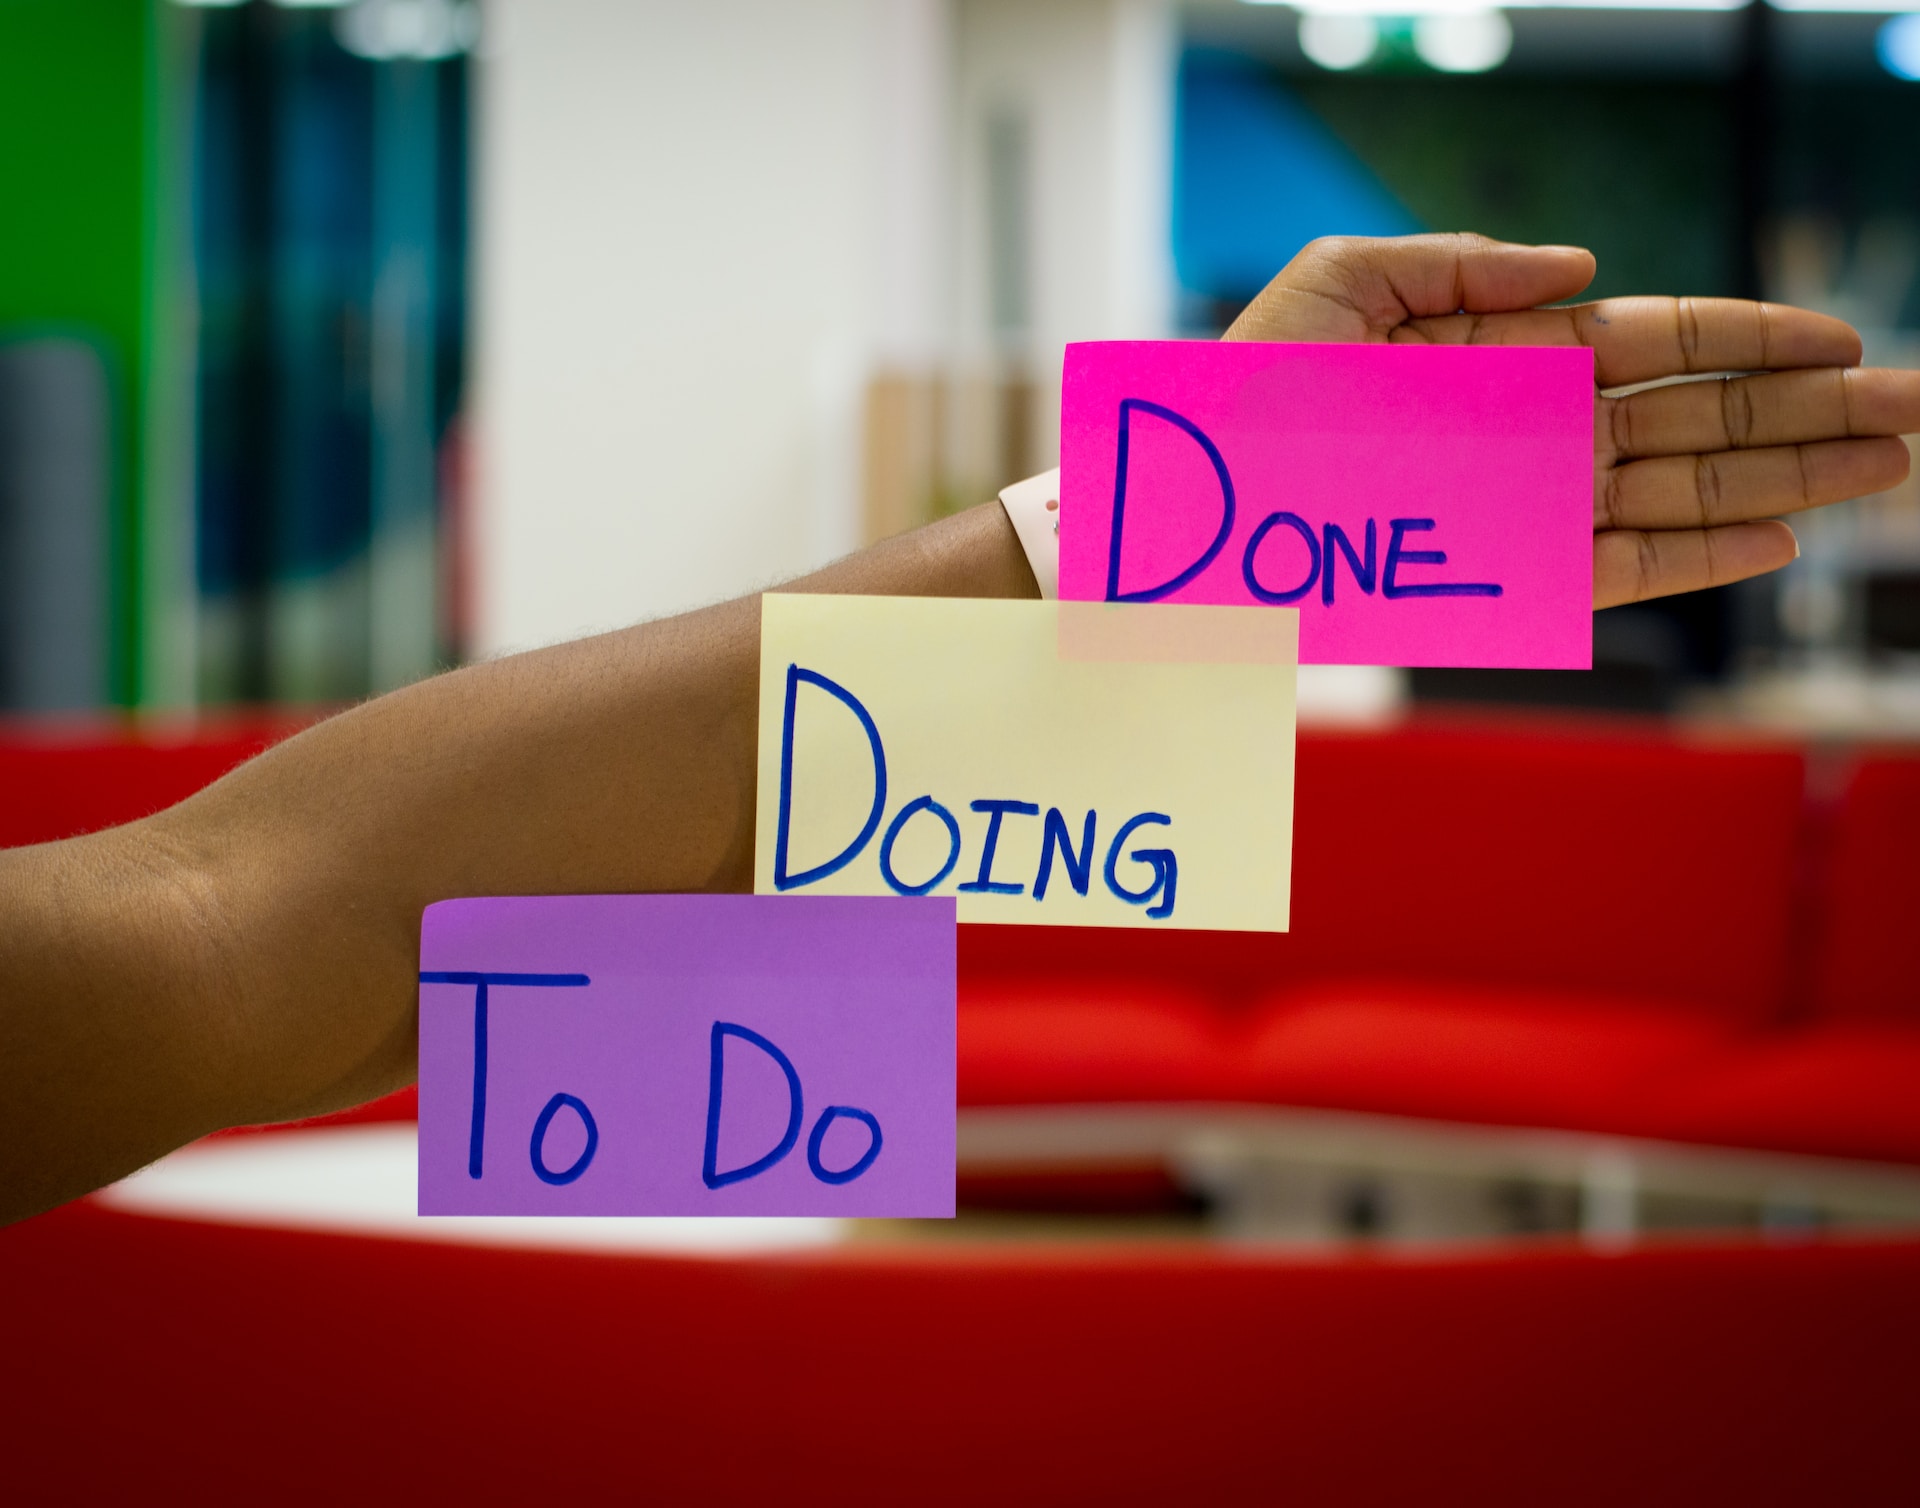 Professional holding up notes reading “to do,” “doing,” “done,” representing the velocity of completing tasks in agile digital product development